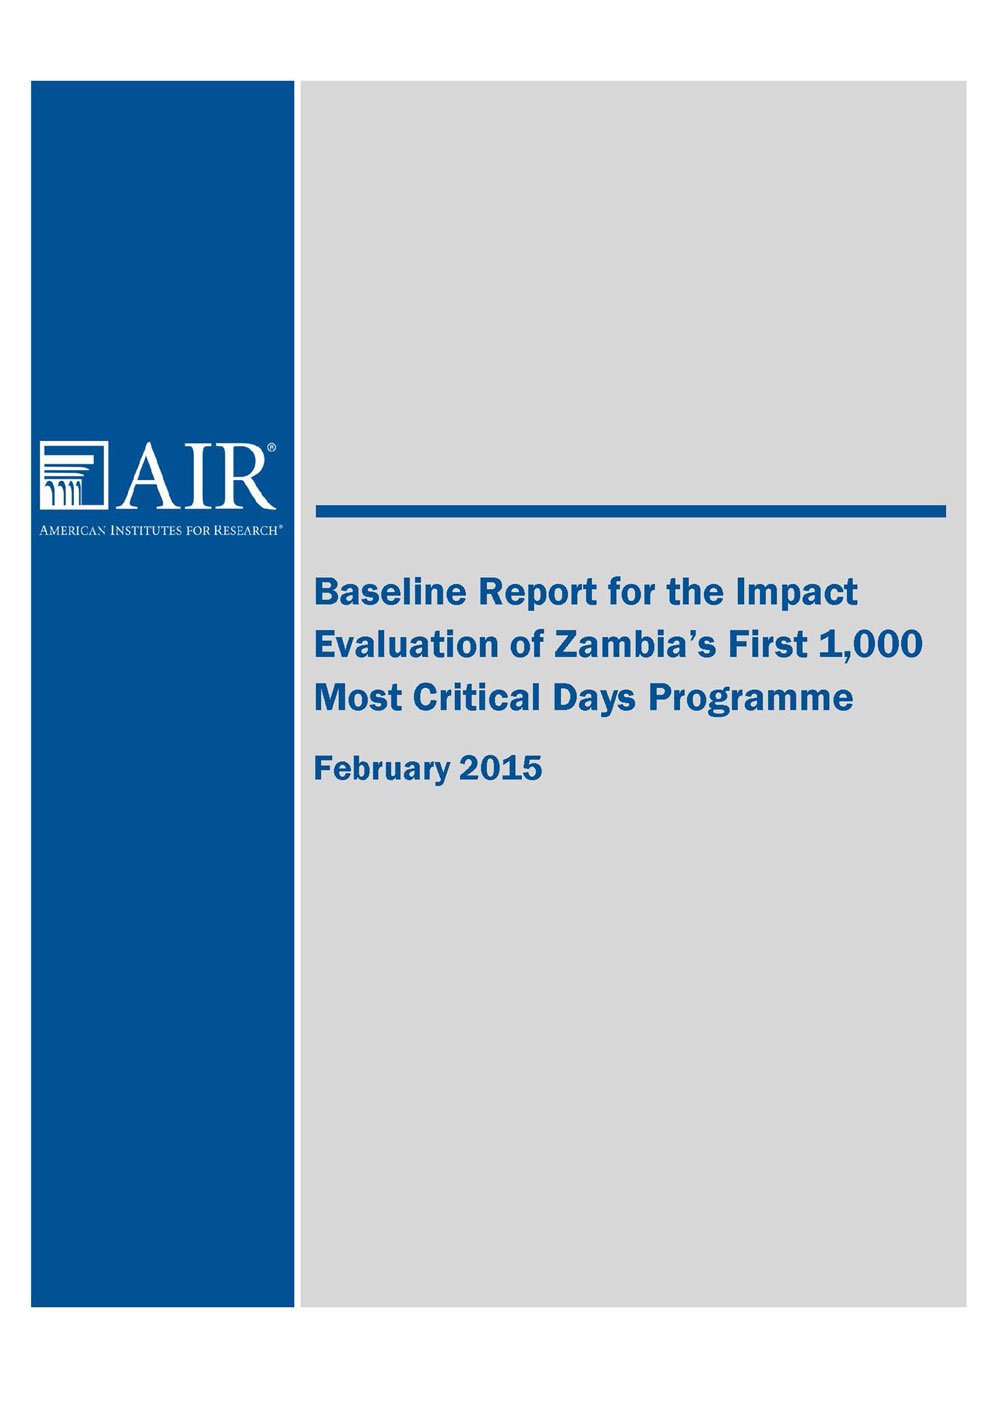 Baseline Study of the Impact Evaluation of the First 1000 Most Critical Days Program under the Scaling Up Nutrition (Sun) Initiative.